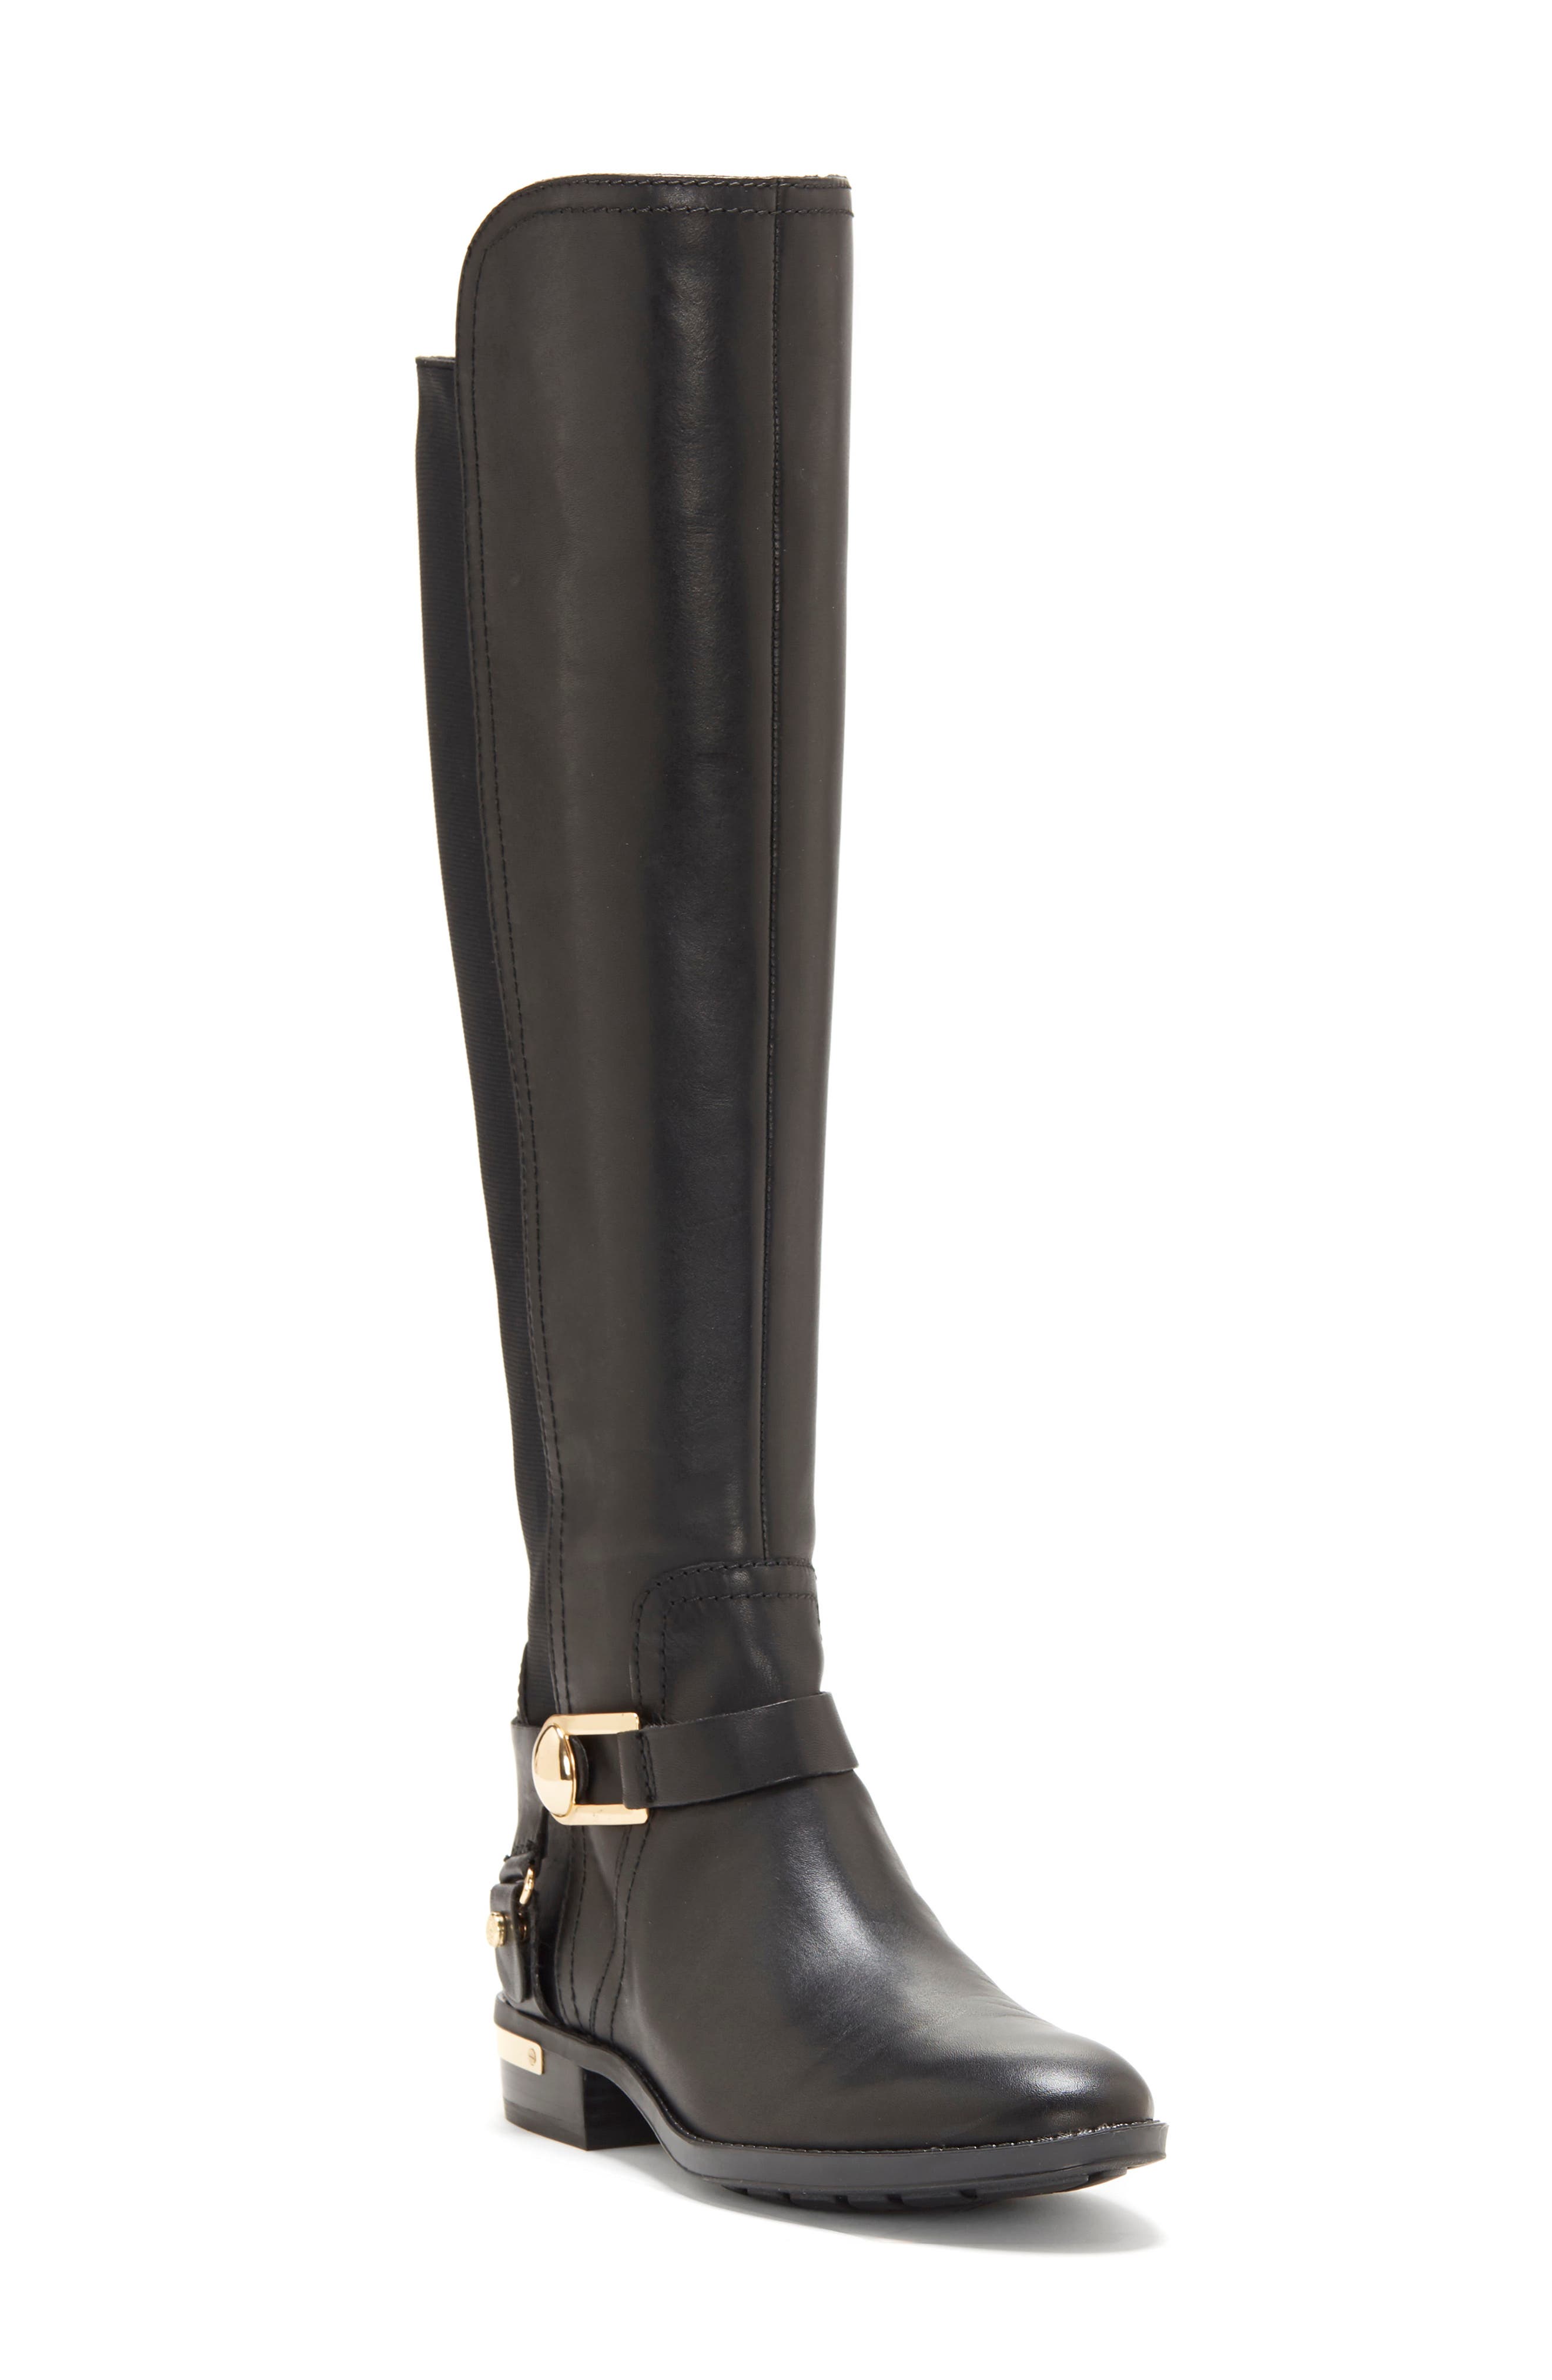 vince camuto black riding boots